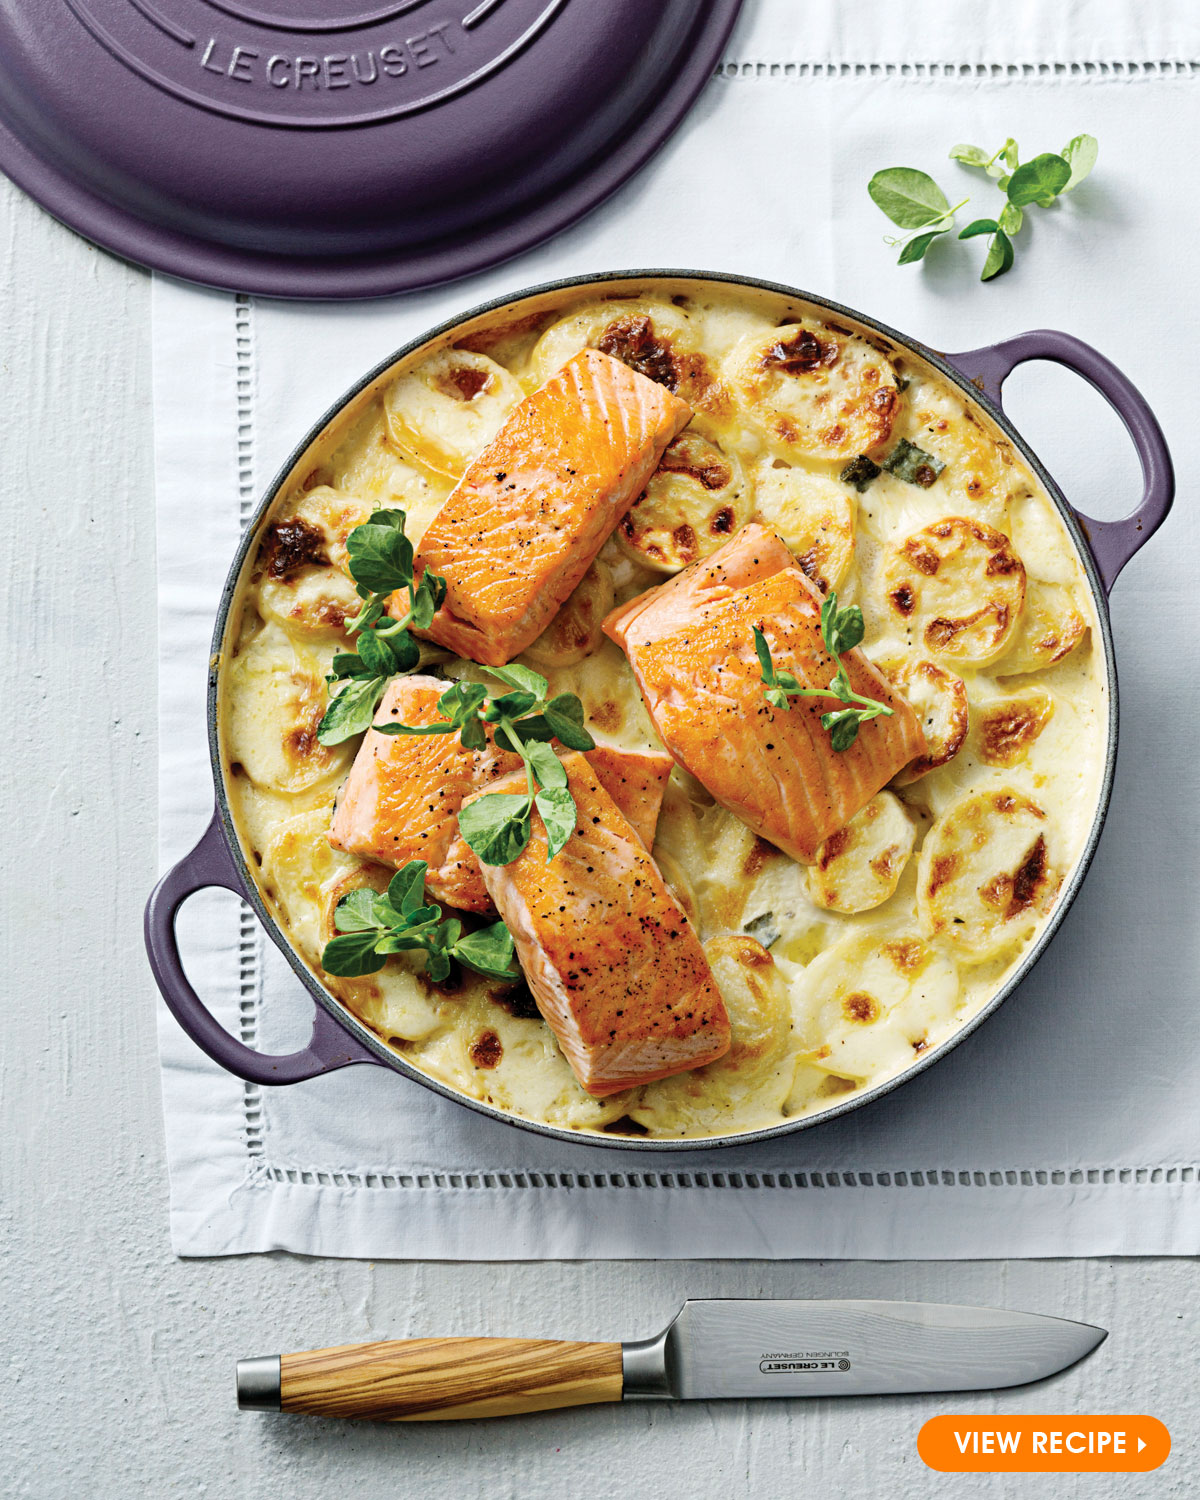 Potato Bake with Grilled Salmon Fillets